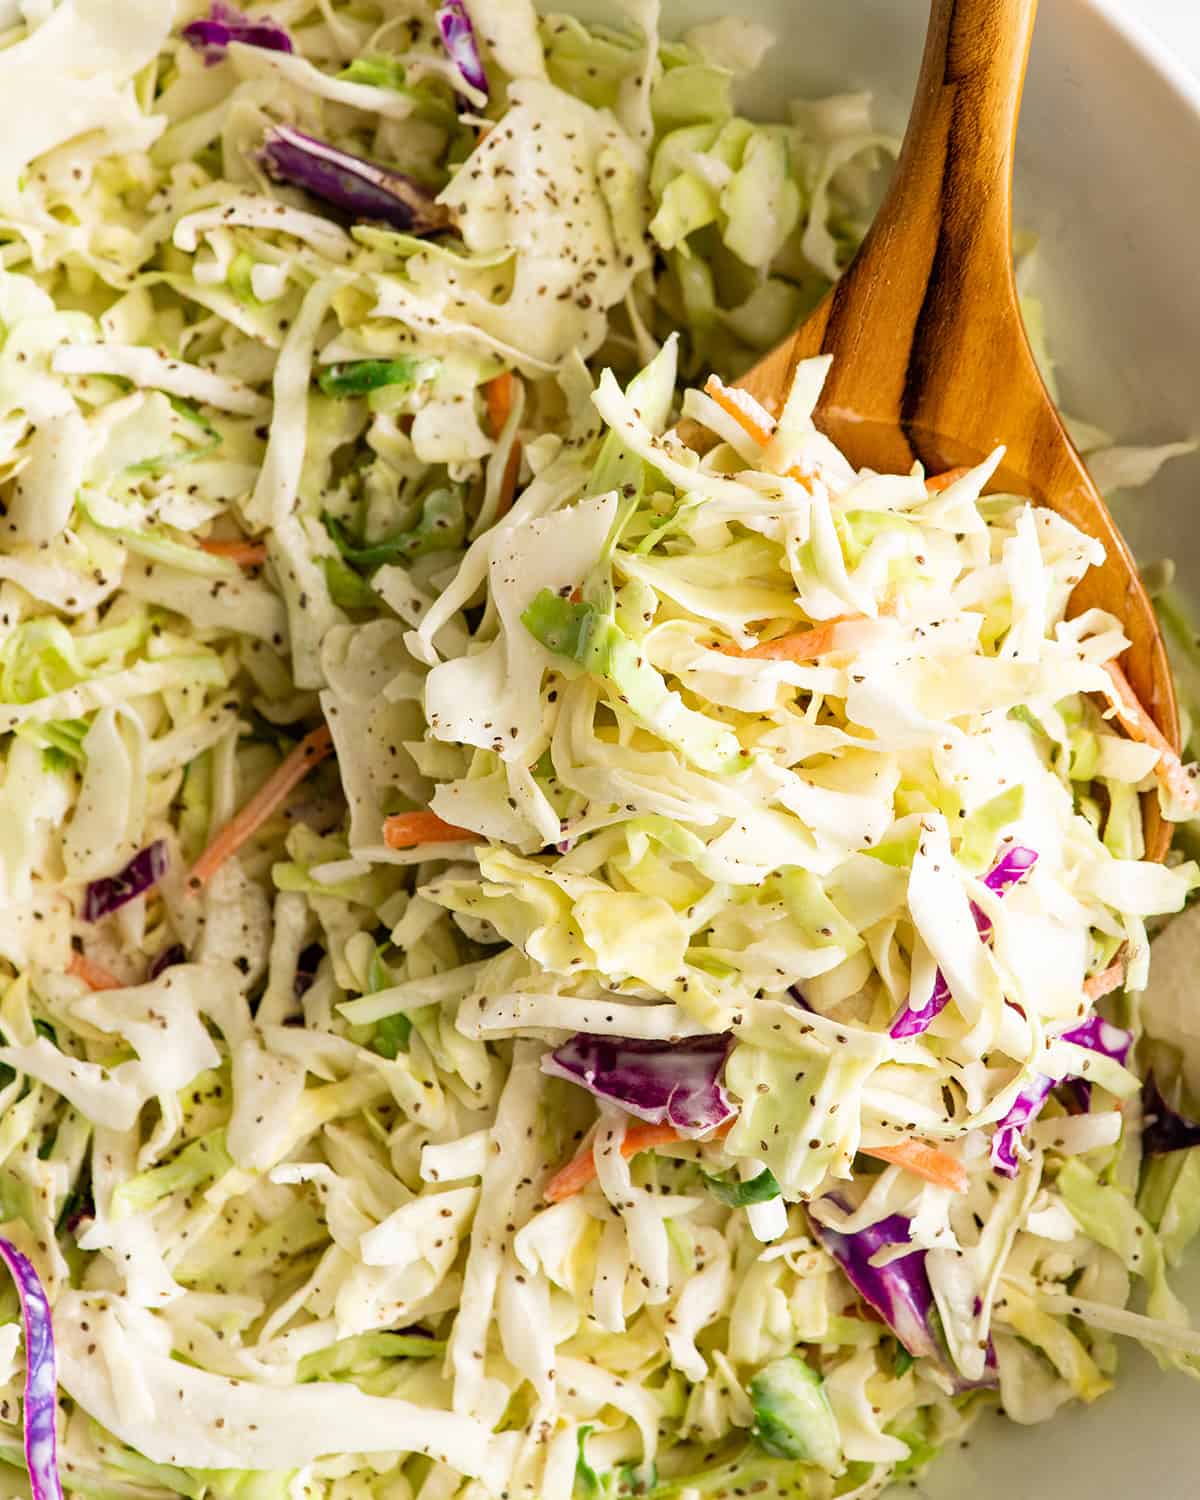 homemade coleslaw recipe in a bowl with a wooden spoon